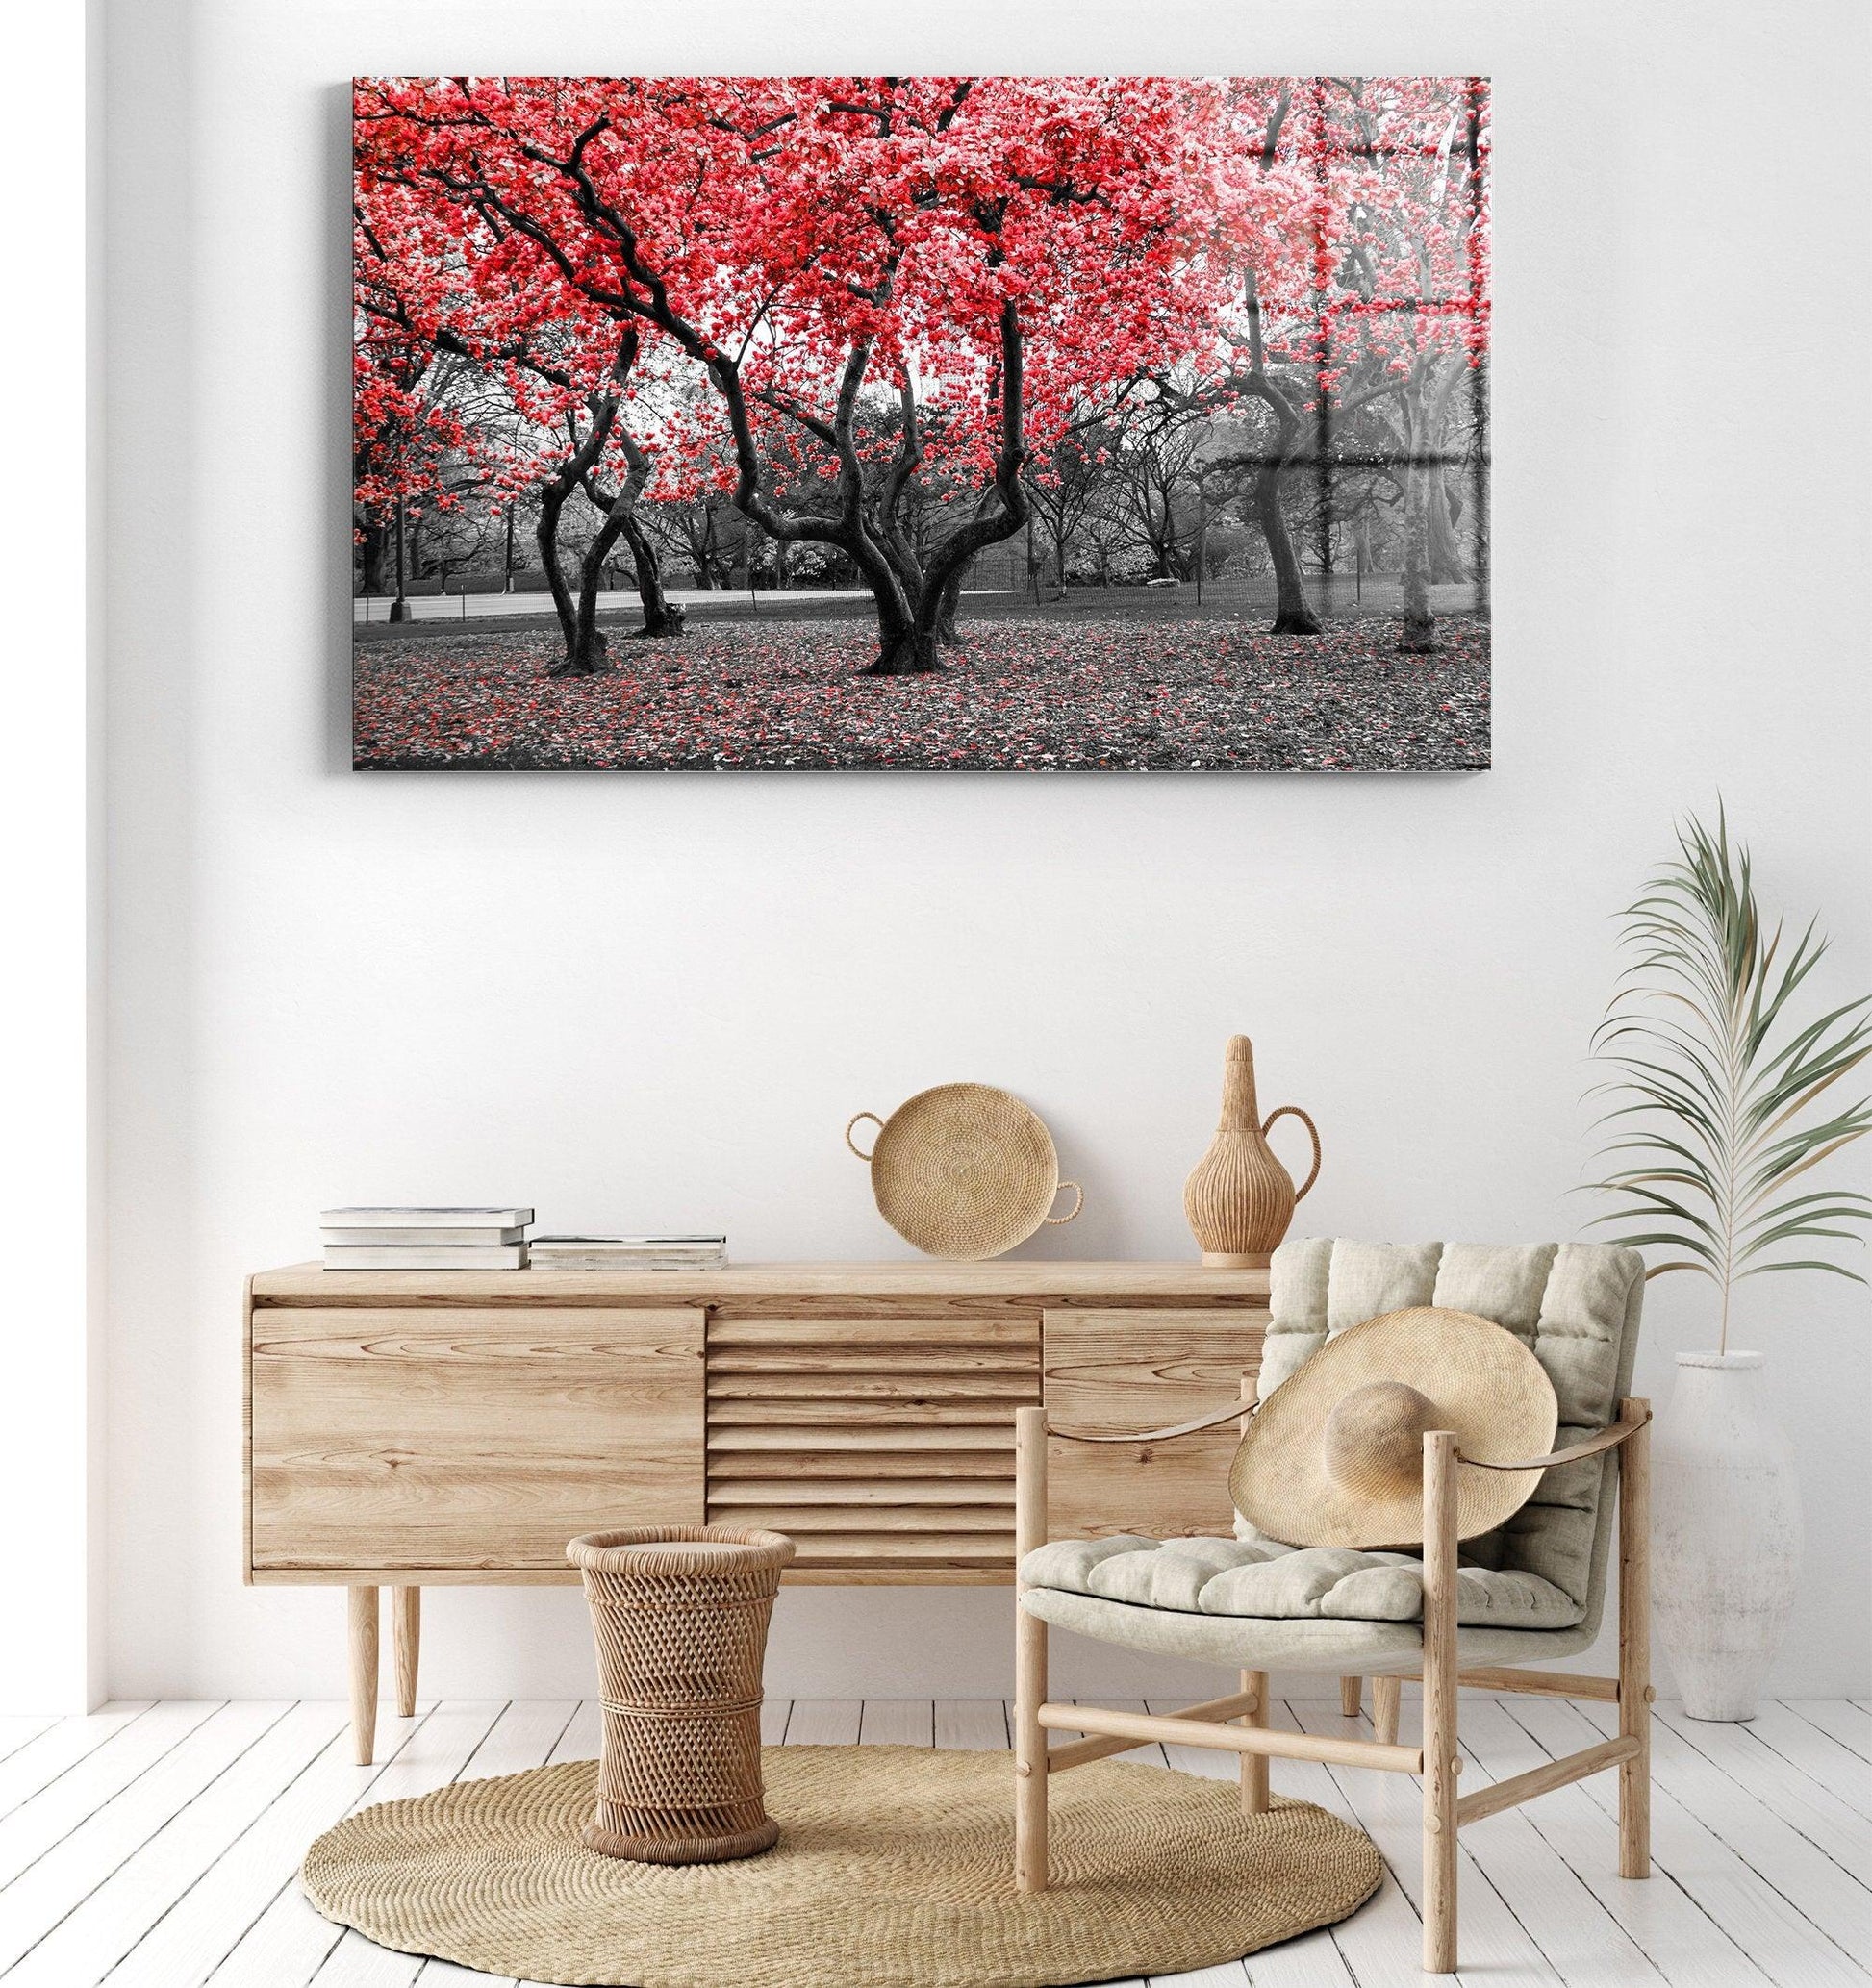 Red Leaves Forest Trees Mist| glass wall art, glass Nature Scenery for living room wall decor & interior design, forest painting on glass - TrendiArt